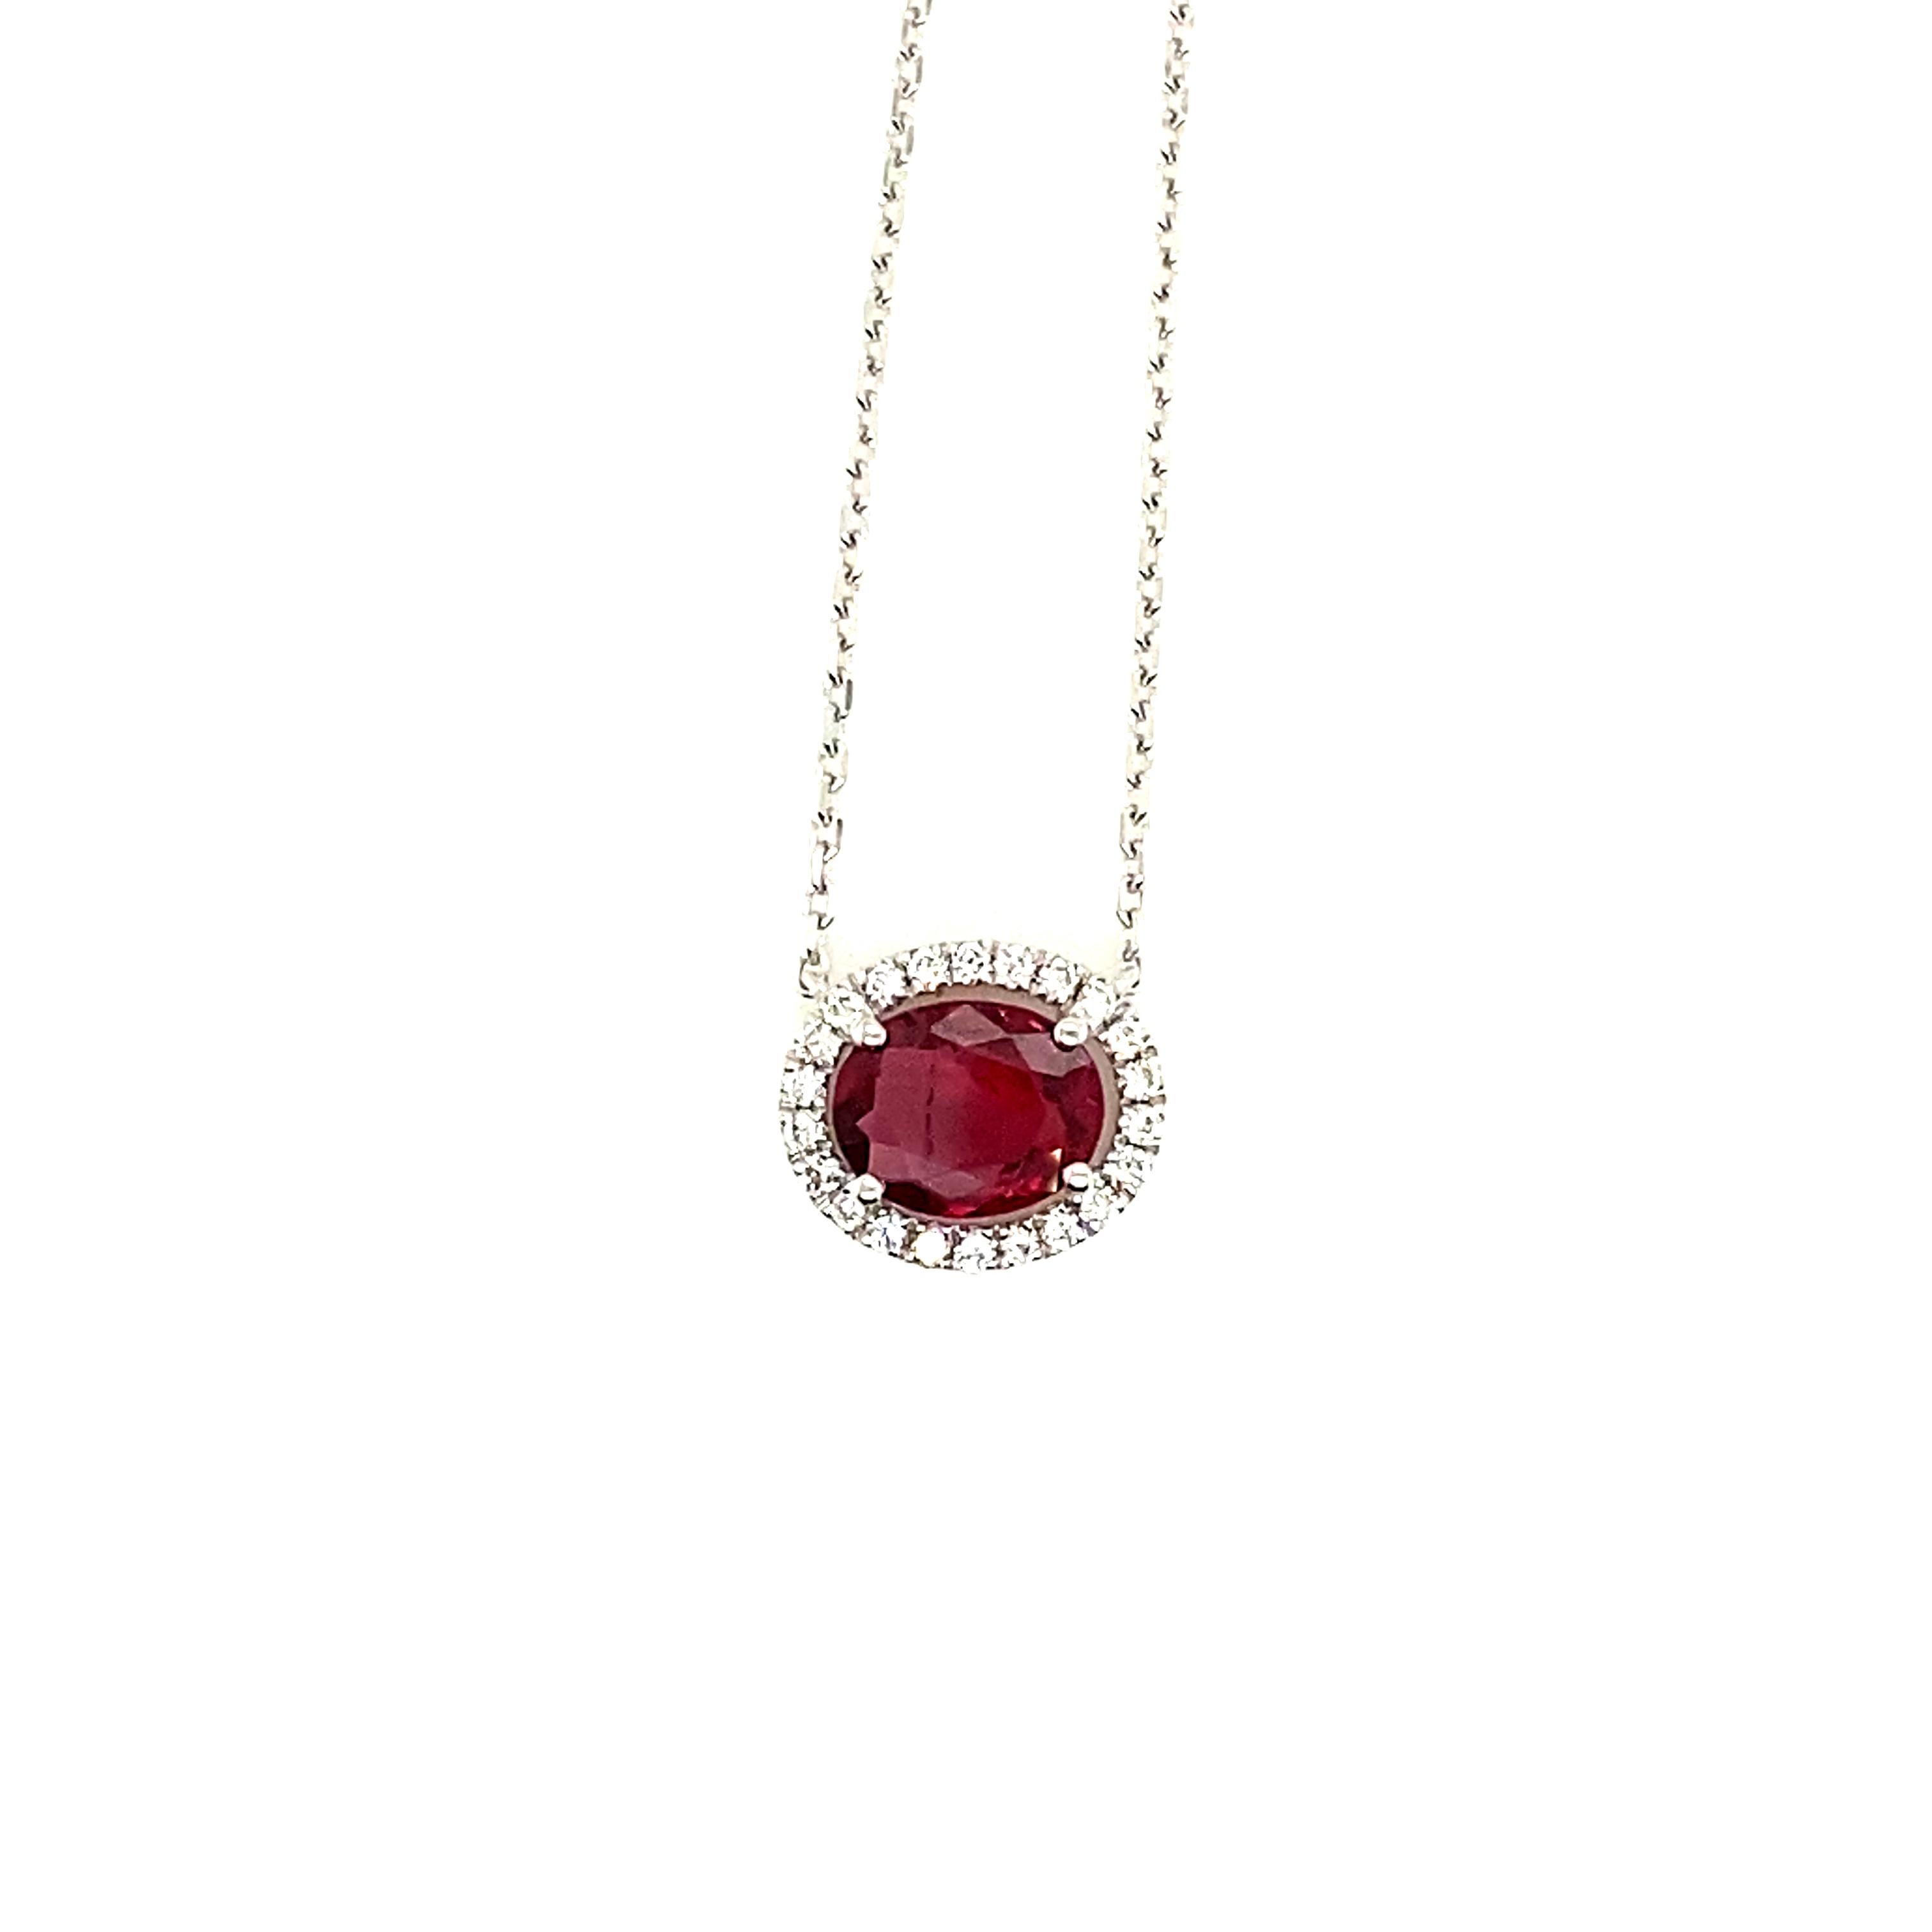 1.16 Carat Oval-Cut Intense Red Ruby and White Diamond Pendant Necklace:

A beautiful pendant necklace, it features a 1.16 carat oval-cut natural intense red ruby in the centre surrounded by a halo of white round-brilliant cut diamonds weighing 0.13